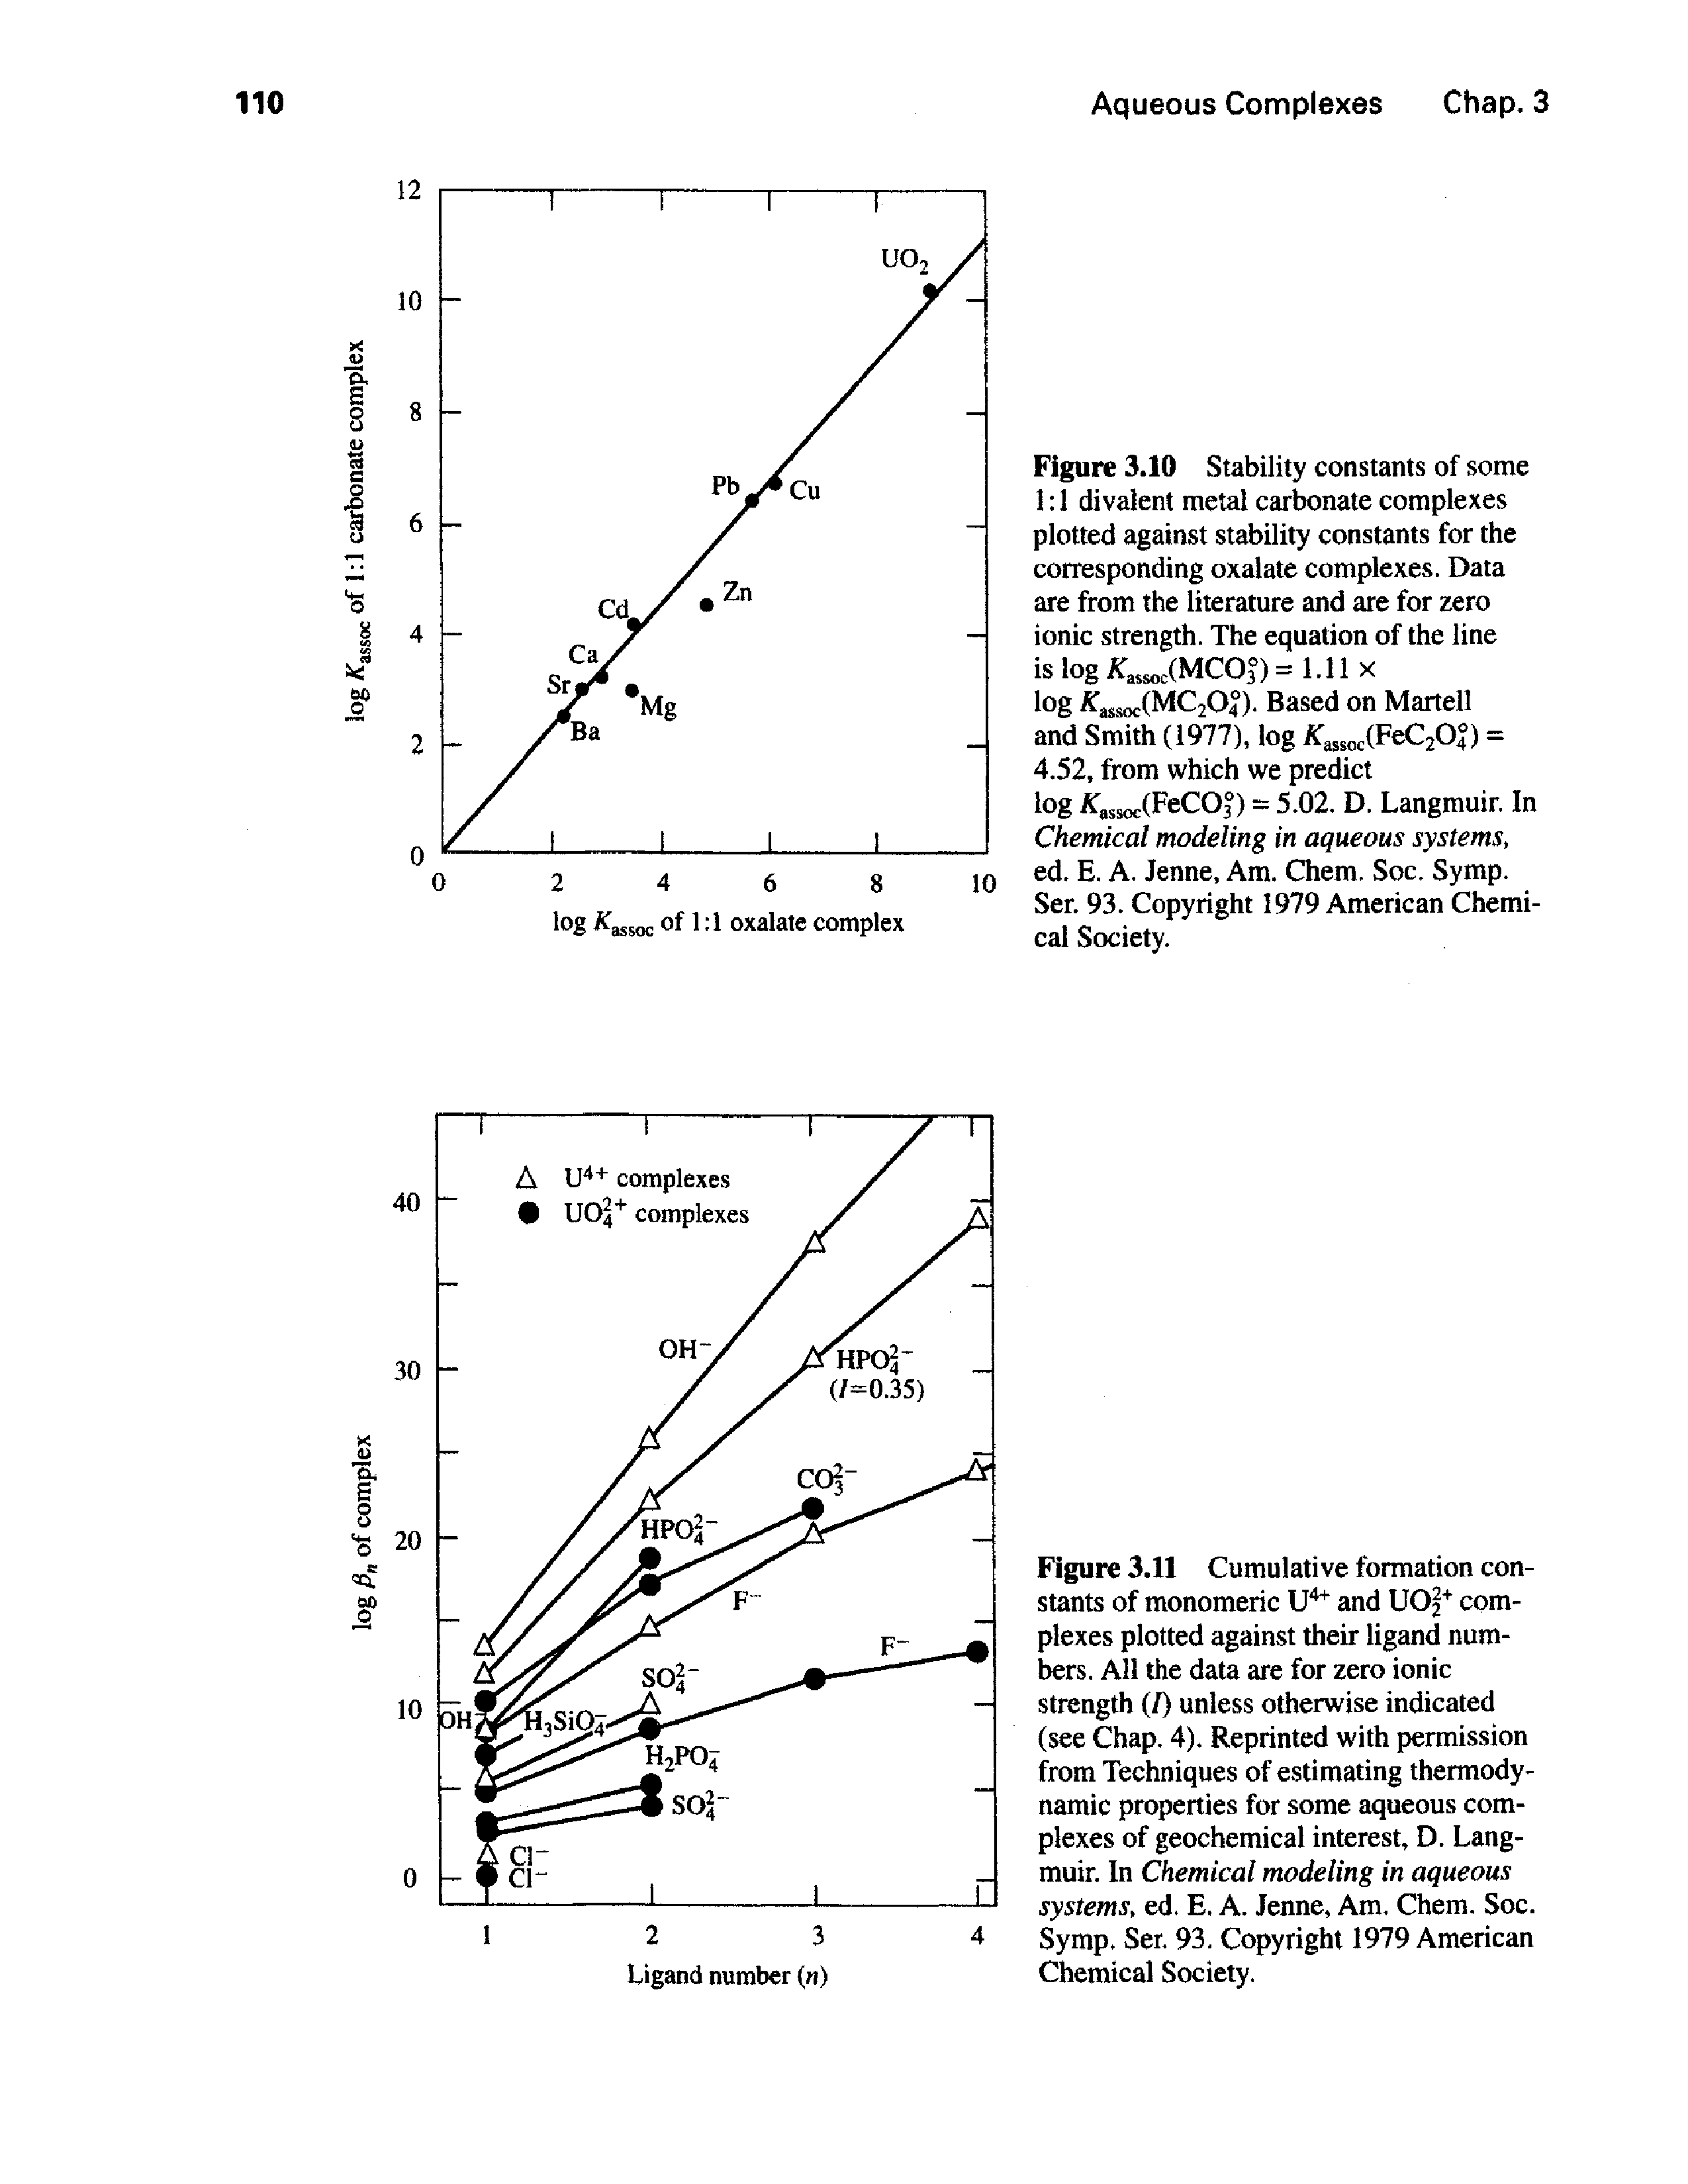 Figure 3.11 Cumulative formation constants of monomeric 1) and complexes plotted against their ligand numbers. All the data are for zero ionic strength (/) unless otherwise indicated (see Chap. 4). Reprinted with permission from Techniques of estimating thermodynamic properties for some aqueous complexes of geochemical interest, D. Langmuir. In Chemical modeling in aqueous systems, ed. E. A. Jenne, Am. Chem. Soc. Symp. Ser. 93. Copyright 1979 American Chemical Society.